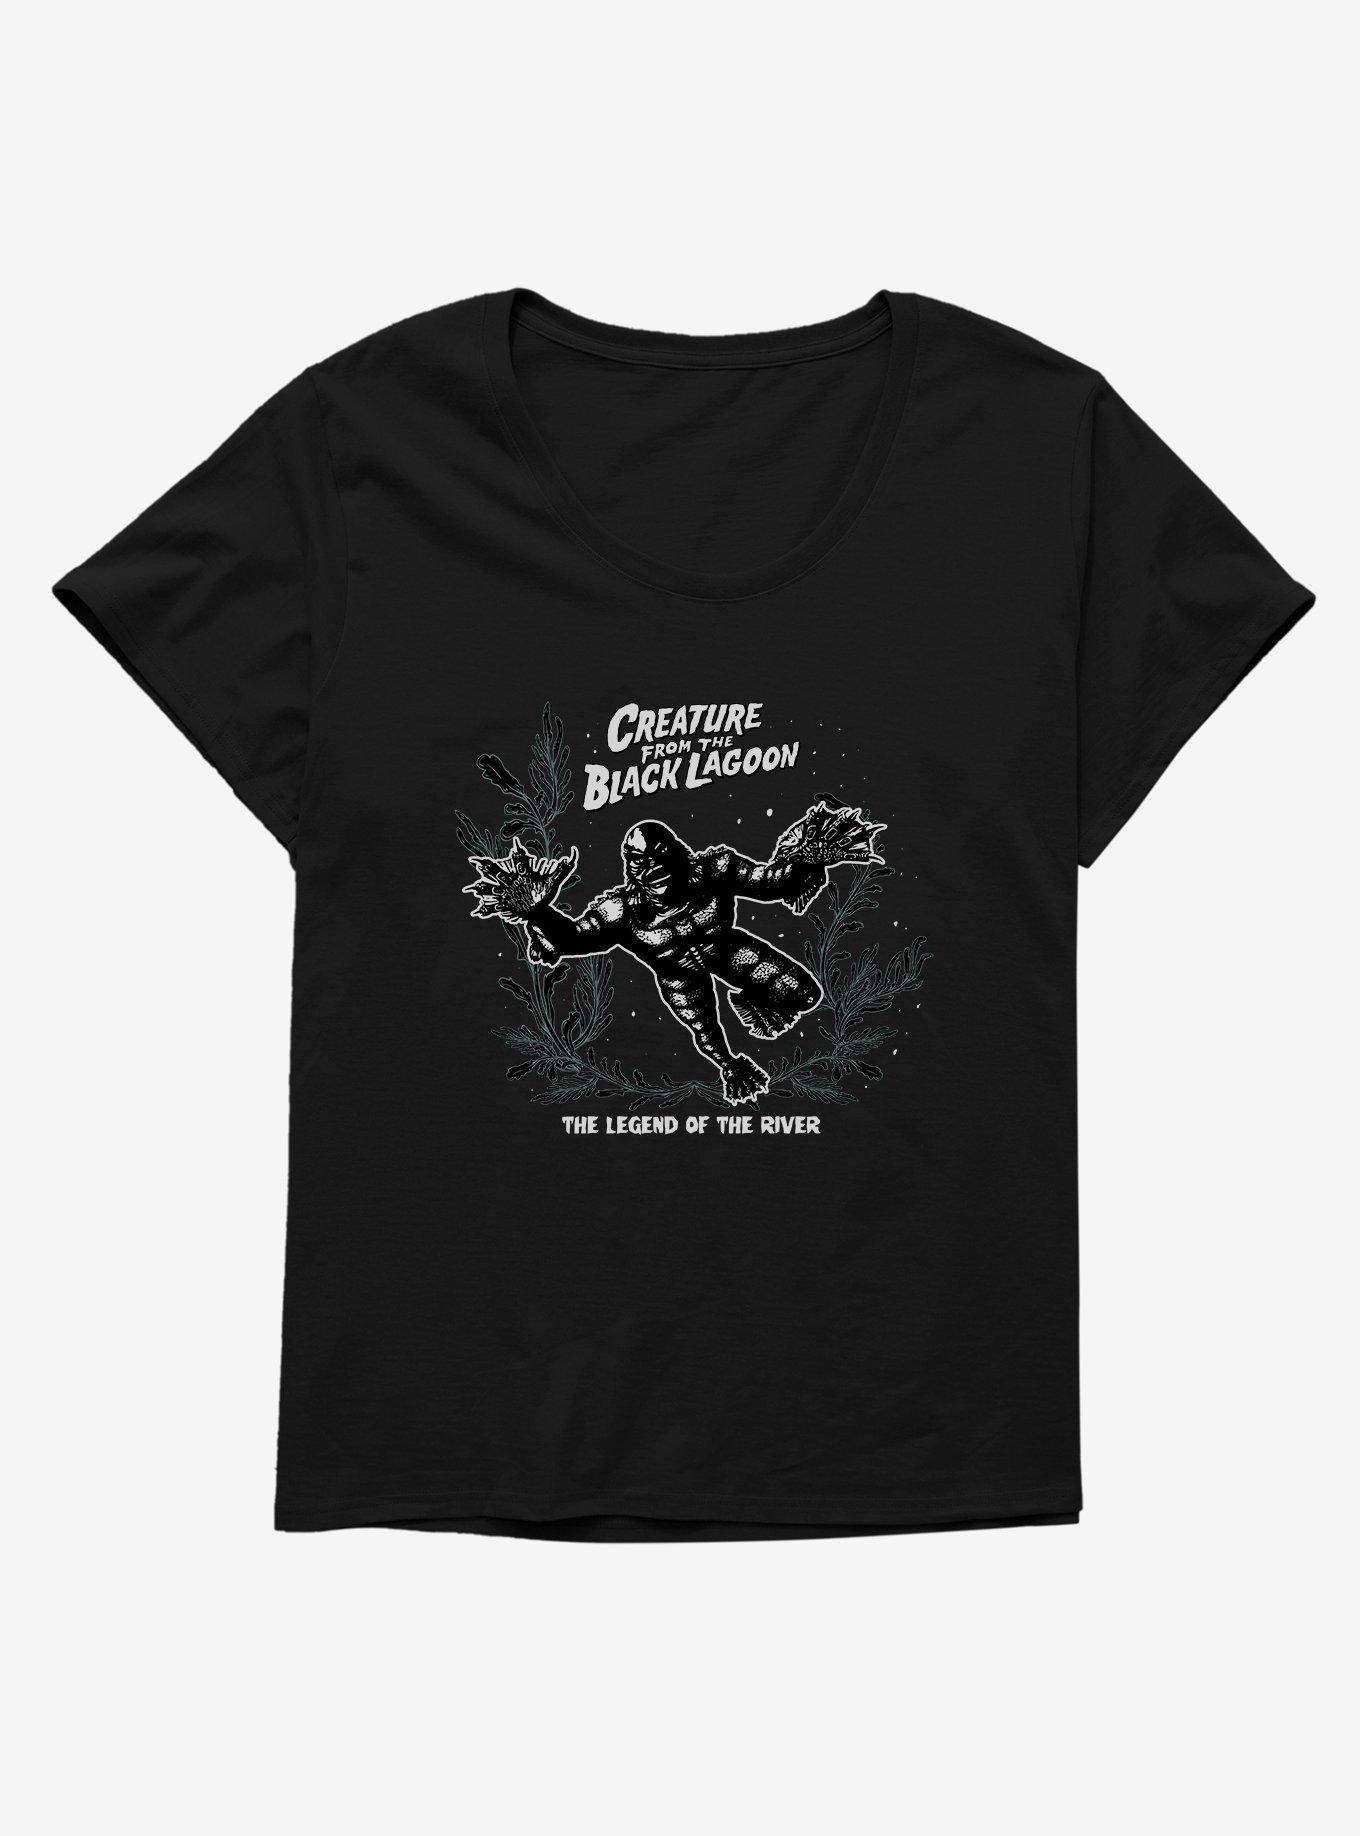 Creature From The Black Lagoon Legend Of The River Girls T-Shirt Plus Size, BLACK, hi-res